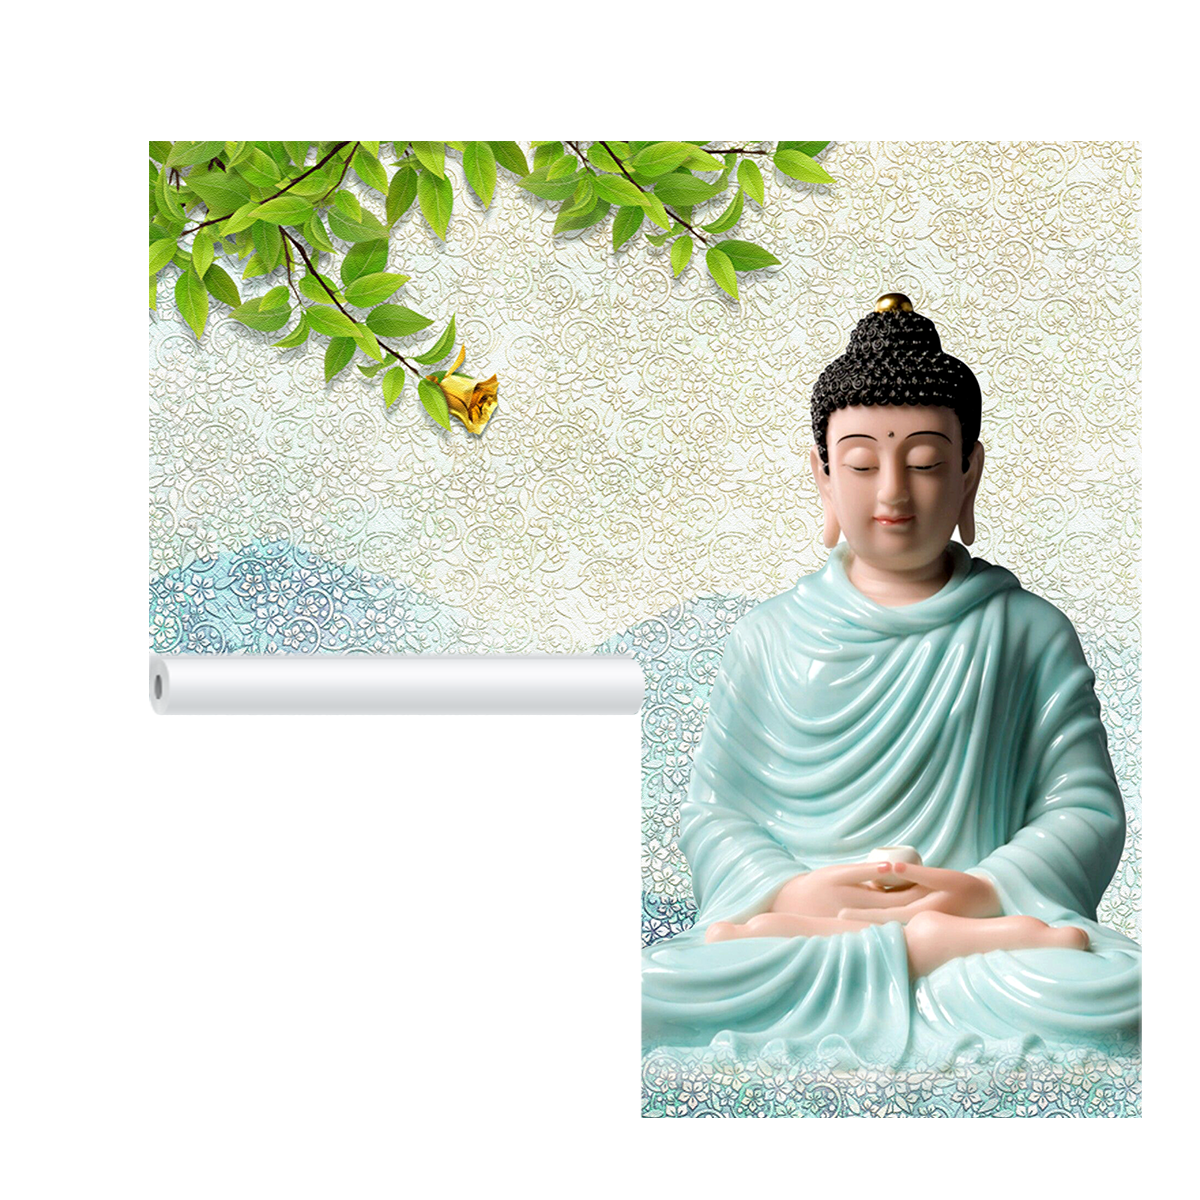 Premium Lord Buddha Wallpaper for Home Walls | HD Self Adhesive Wallpapers Just Peel and Stick